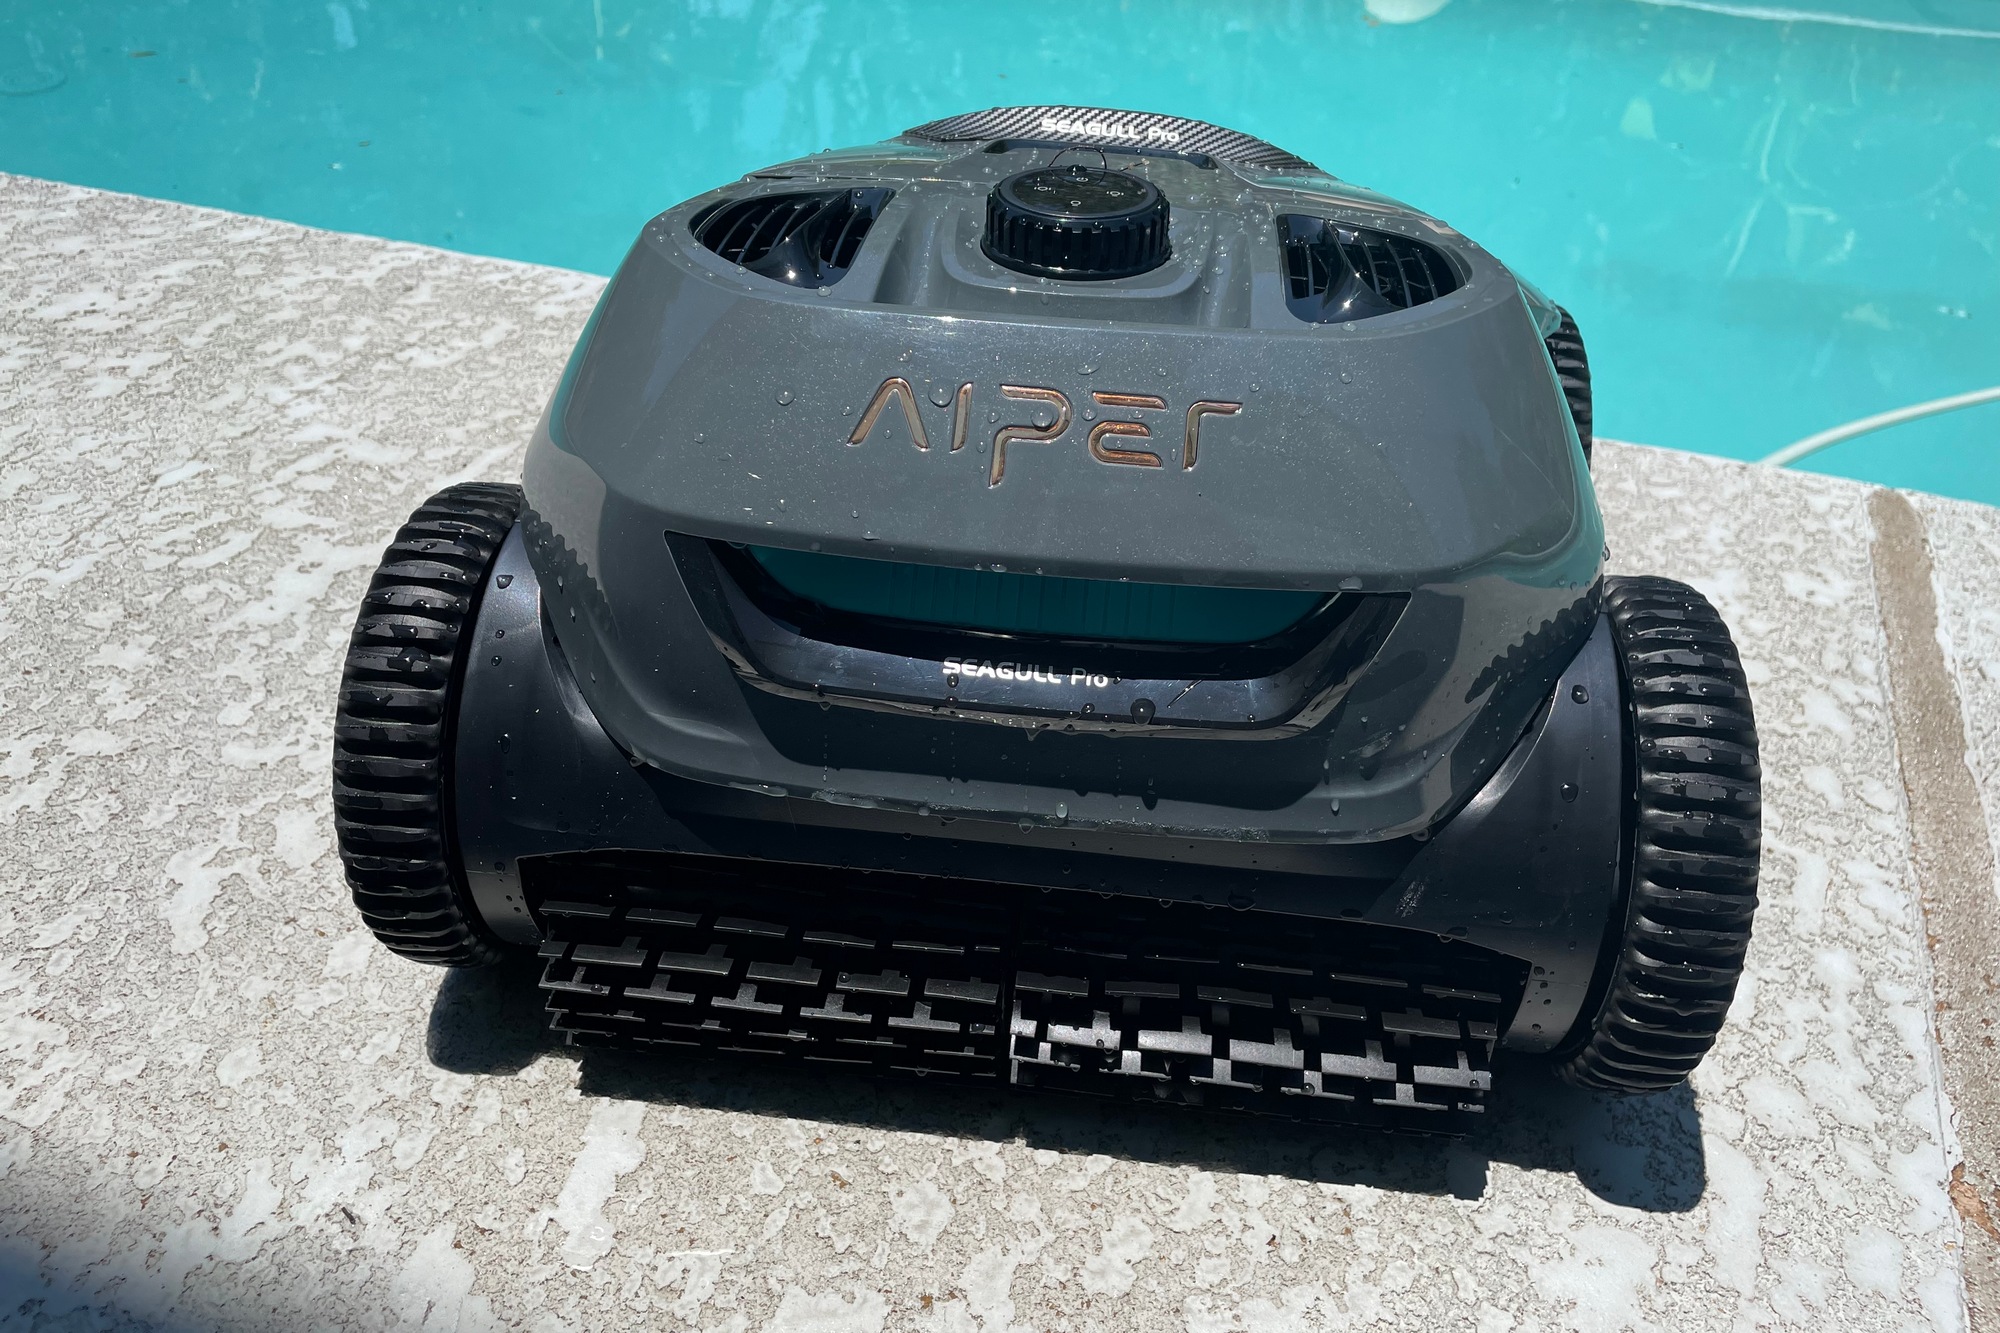 Aiper Seagull Pro – best robot pool cleaner robot for large pools